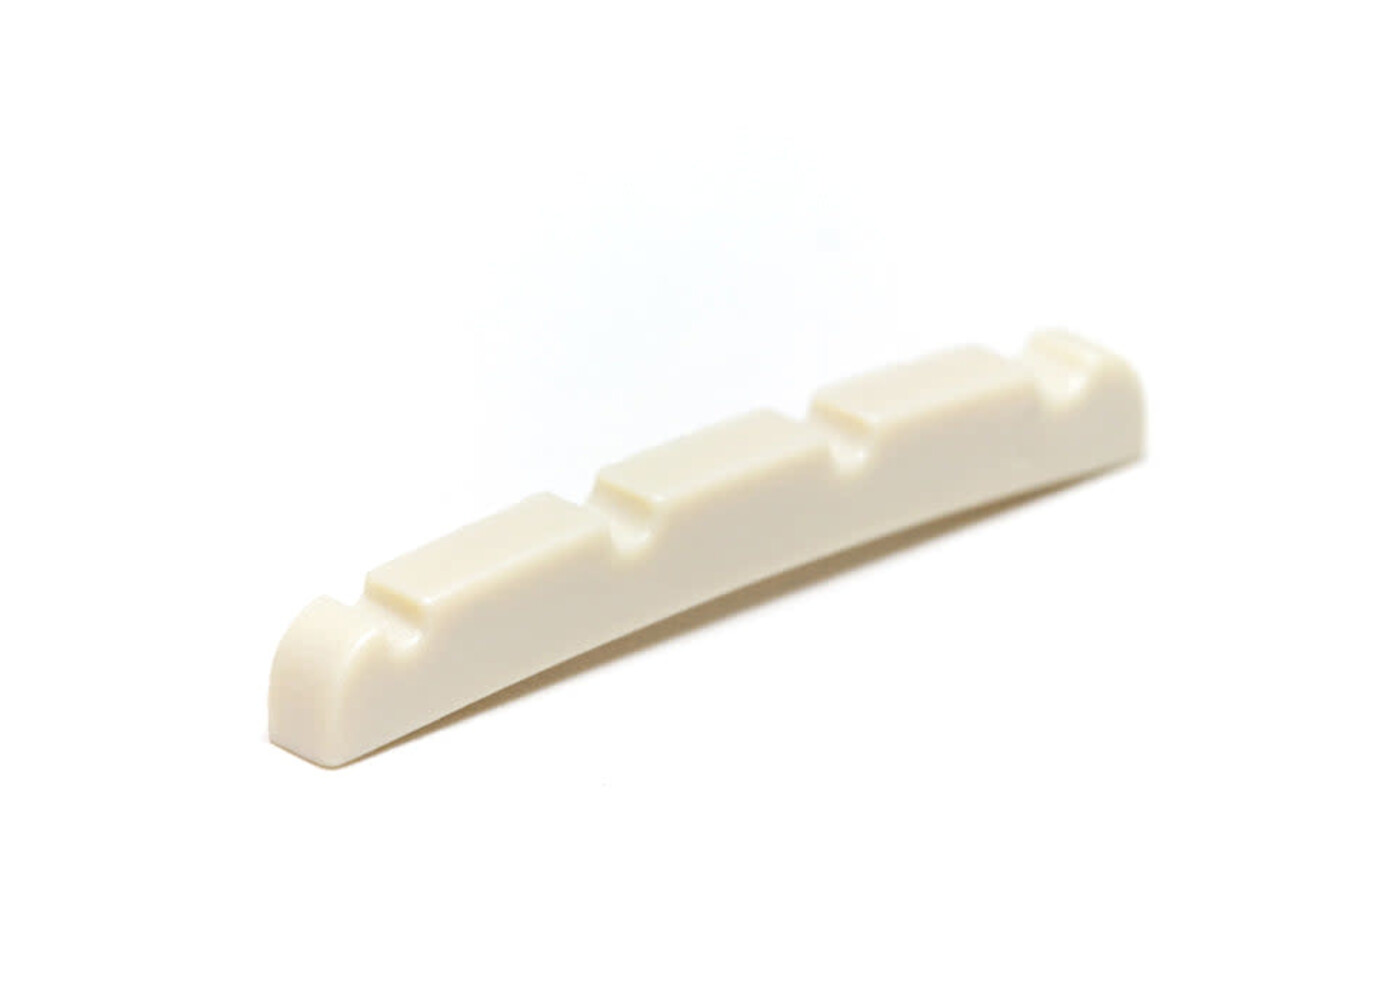 Allparts Allparts Bone Nut for Jazz bass, Slotted